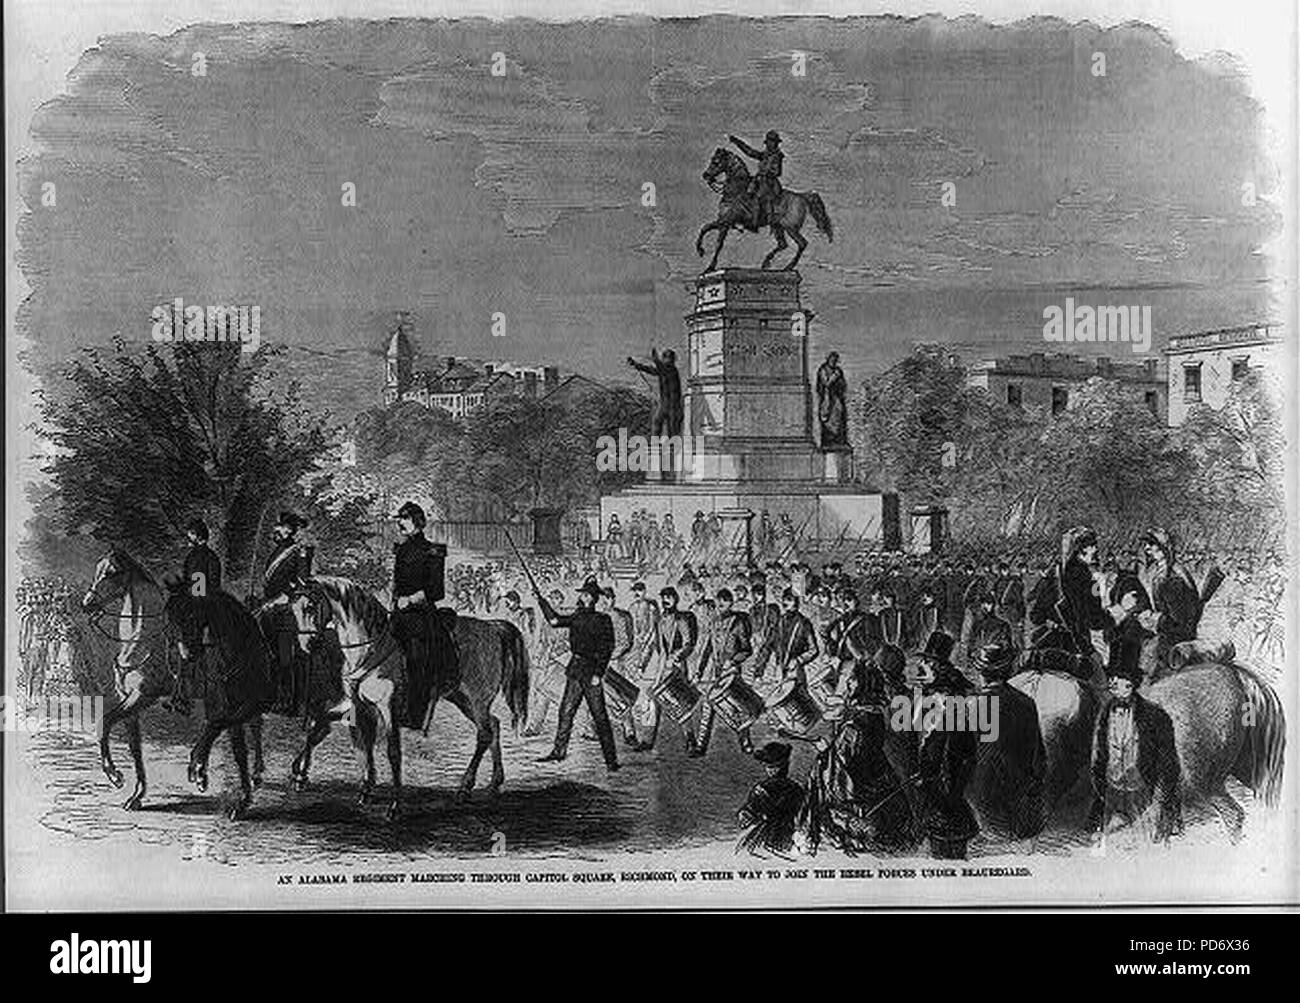 An Alabama regiment marching Capitol Square Richmond on their way to join the rebel forces under Beauregard Stock Photo